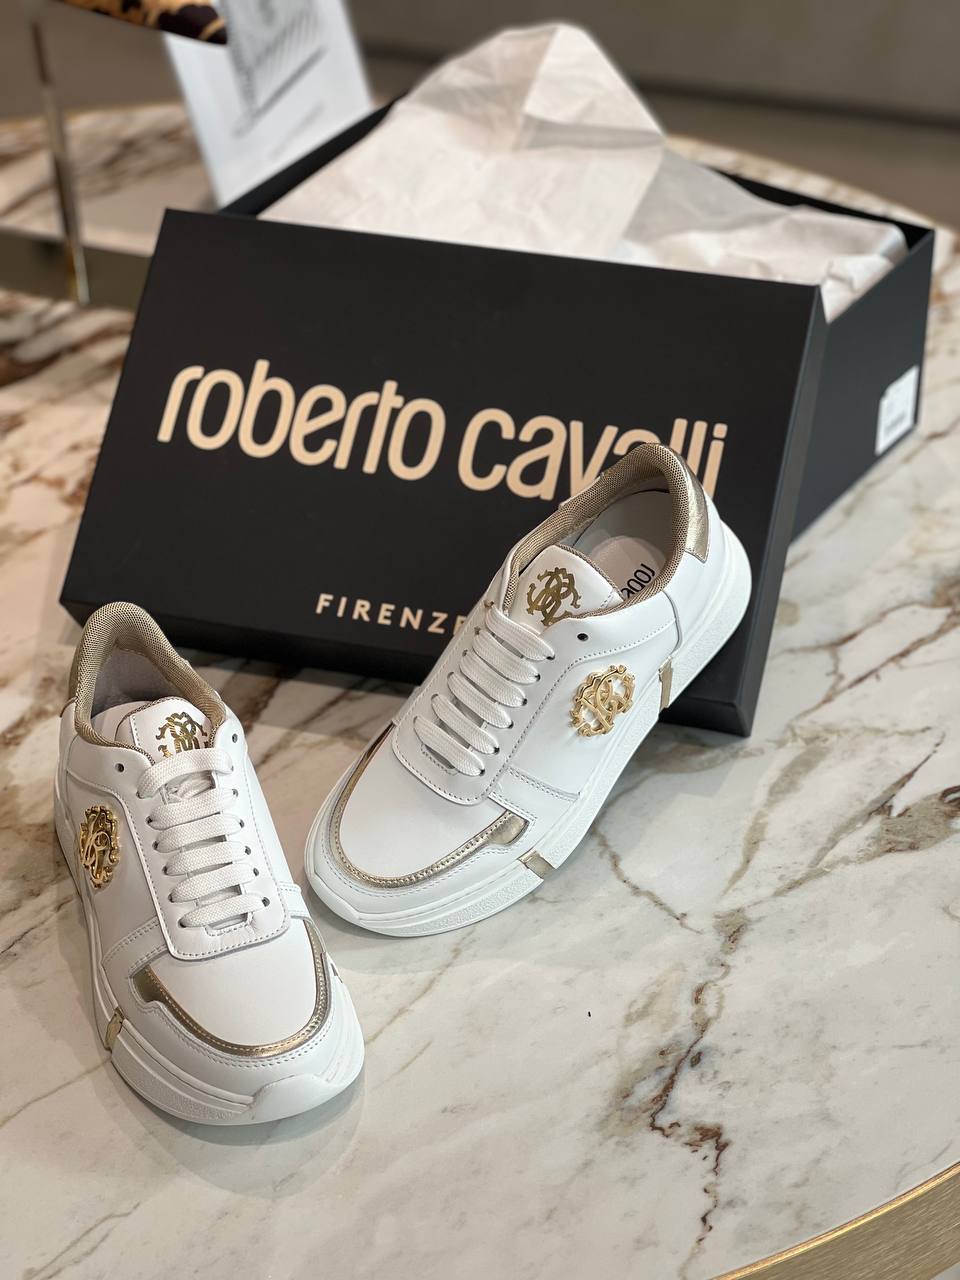 Roberto Cavalli Outlets 5105